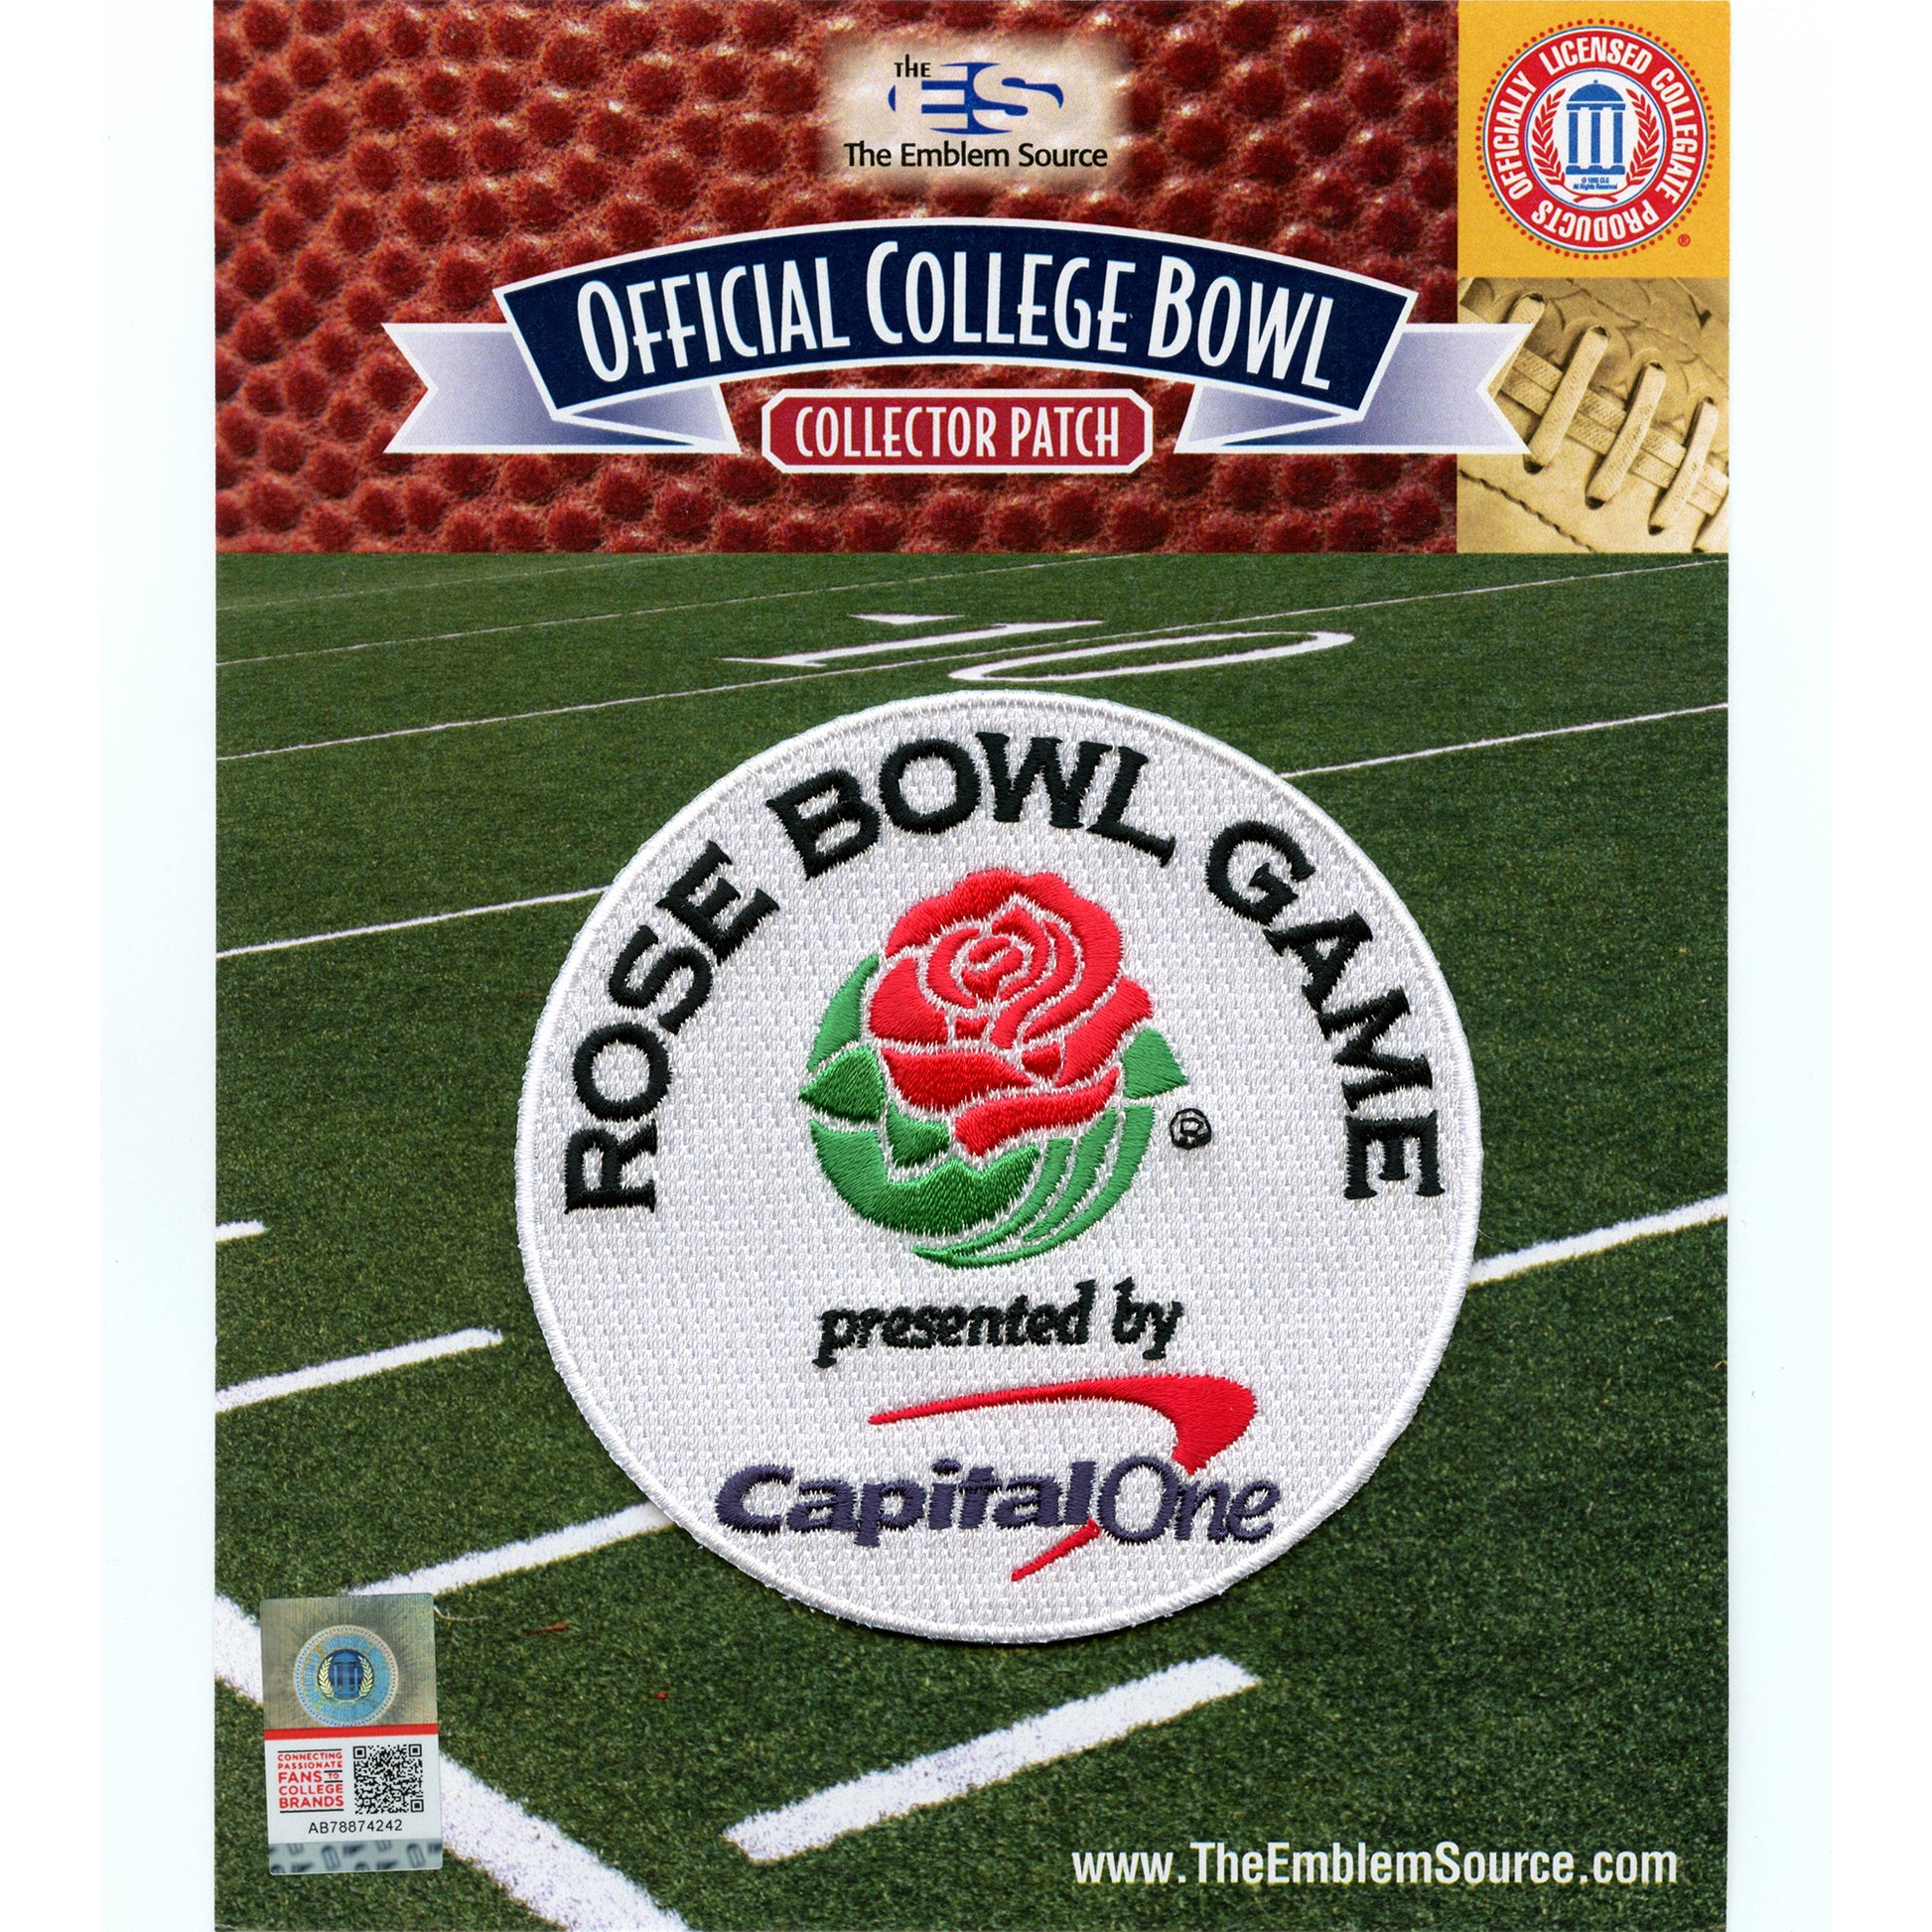 Got myself a Rose Bowl patch to put on my jersey - happy with how